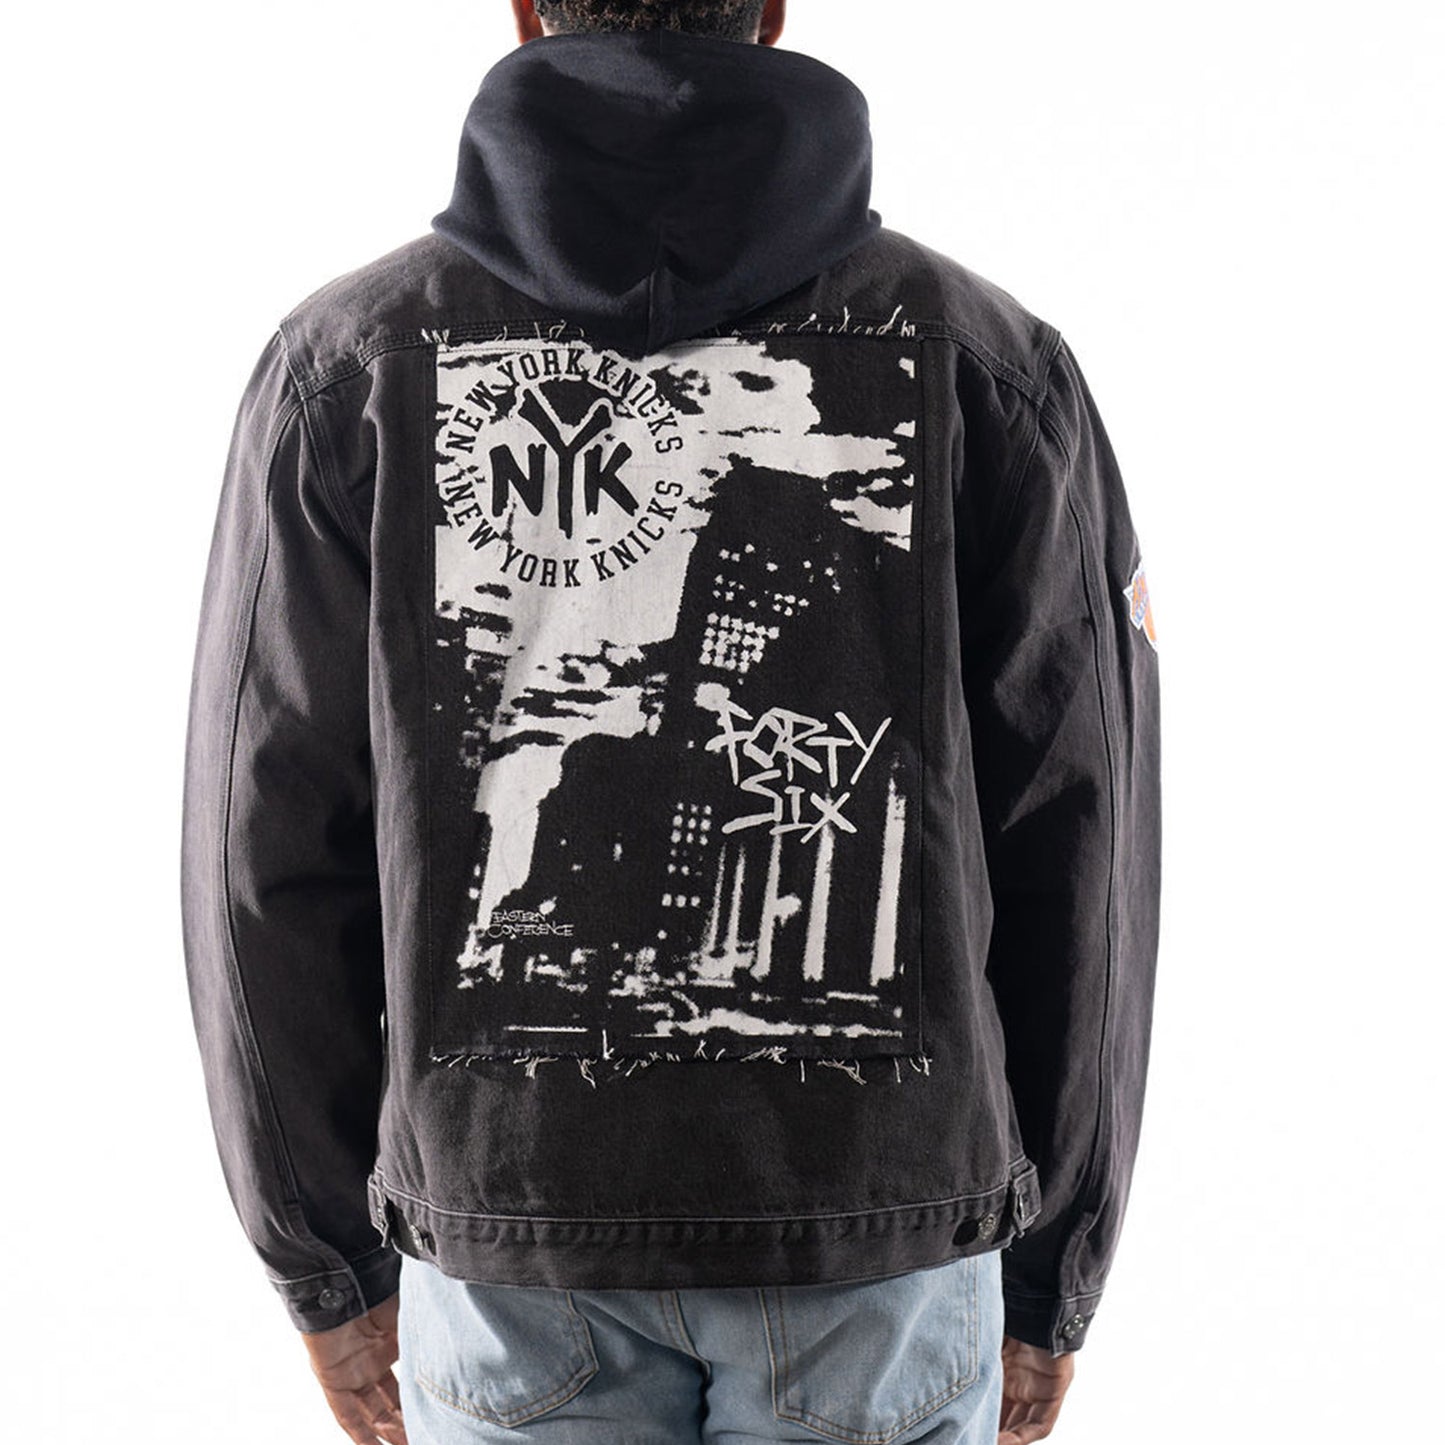 Wild Collective Knicks Graphic Back Denim Jacket In Black - Back View On Model